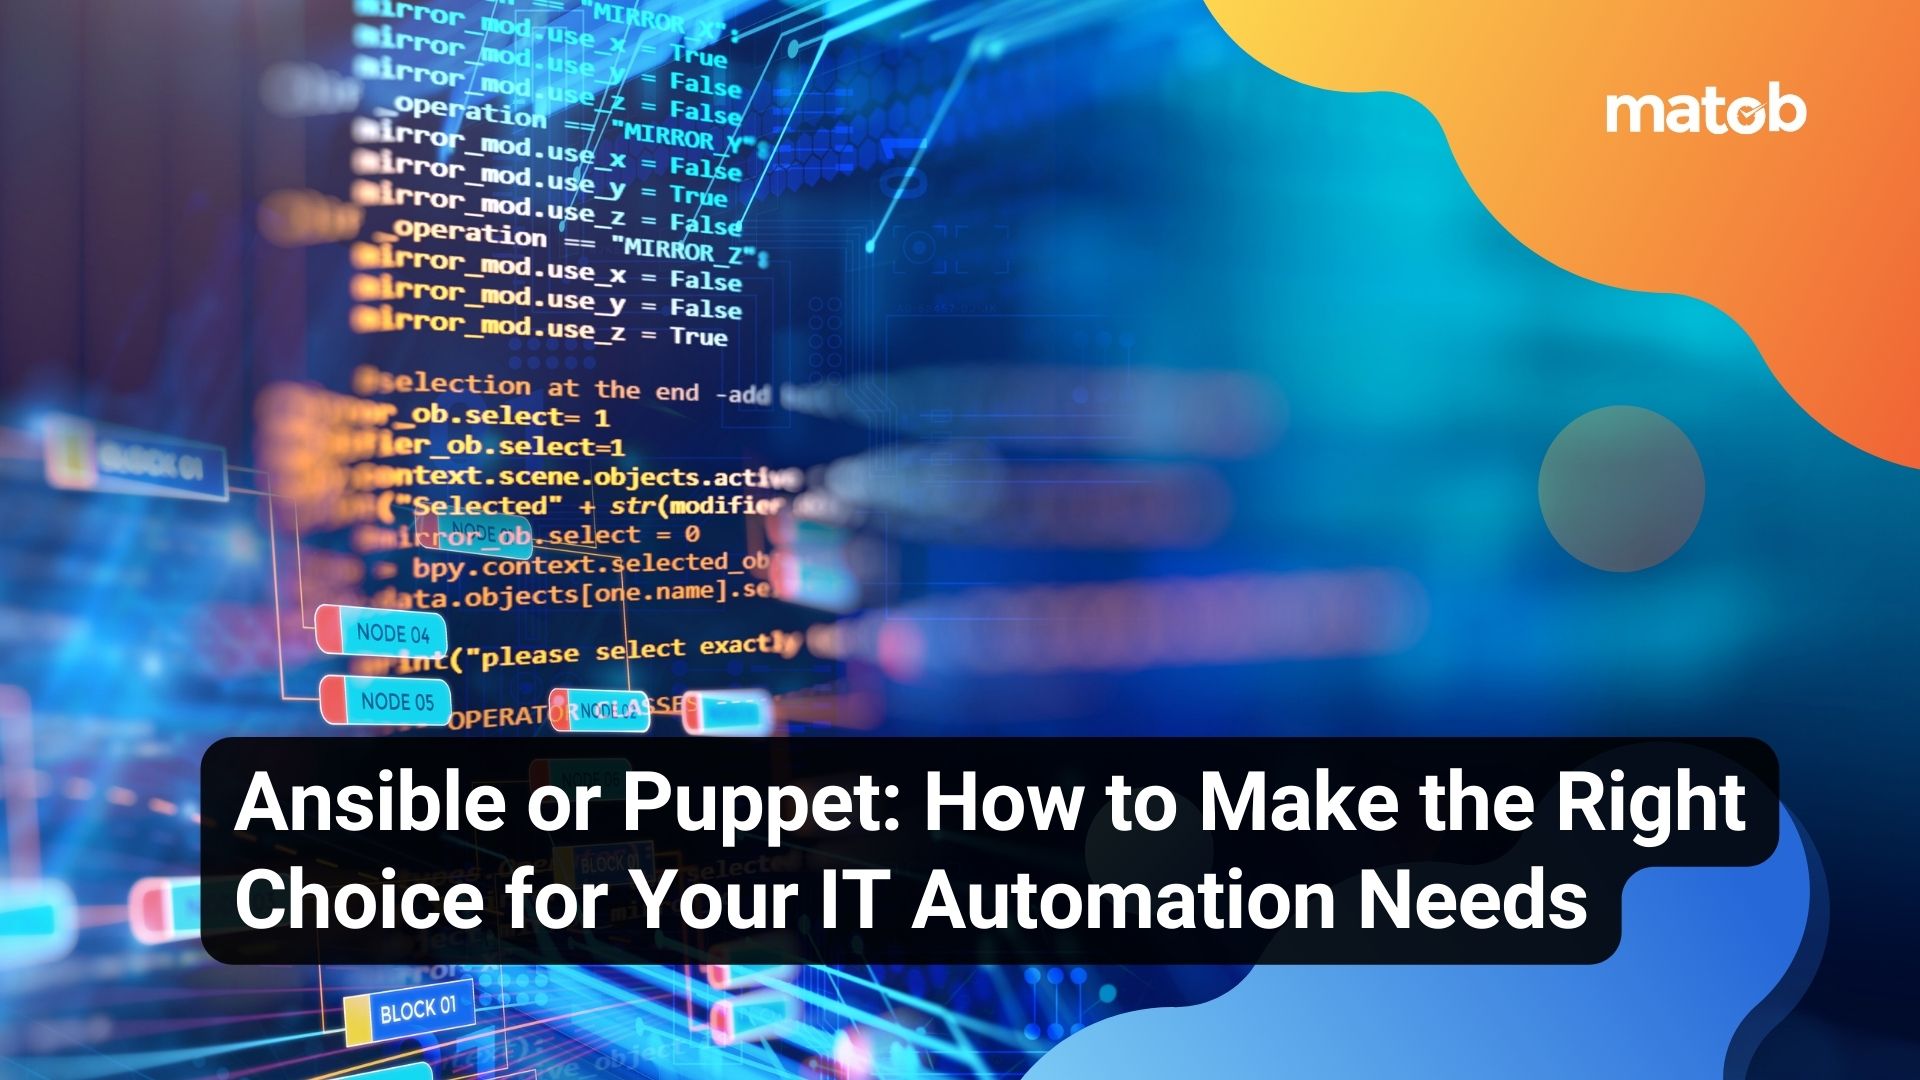 Ansible or Puppet: How to Make the Right Choice for Your IT Automation Needs